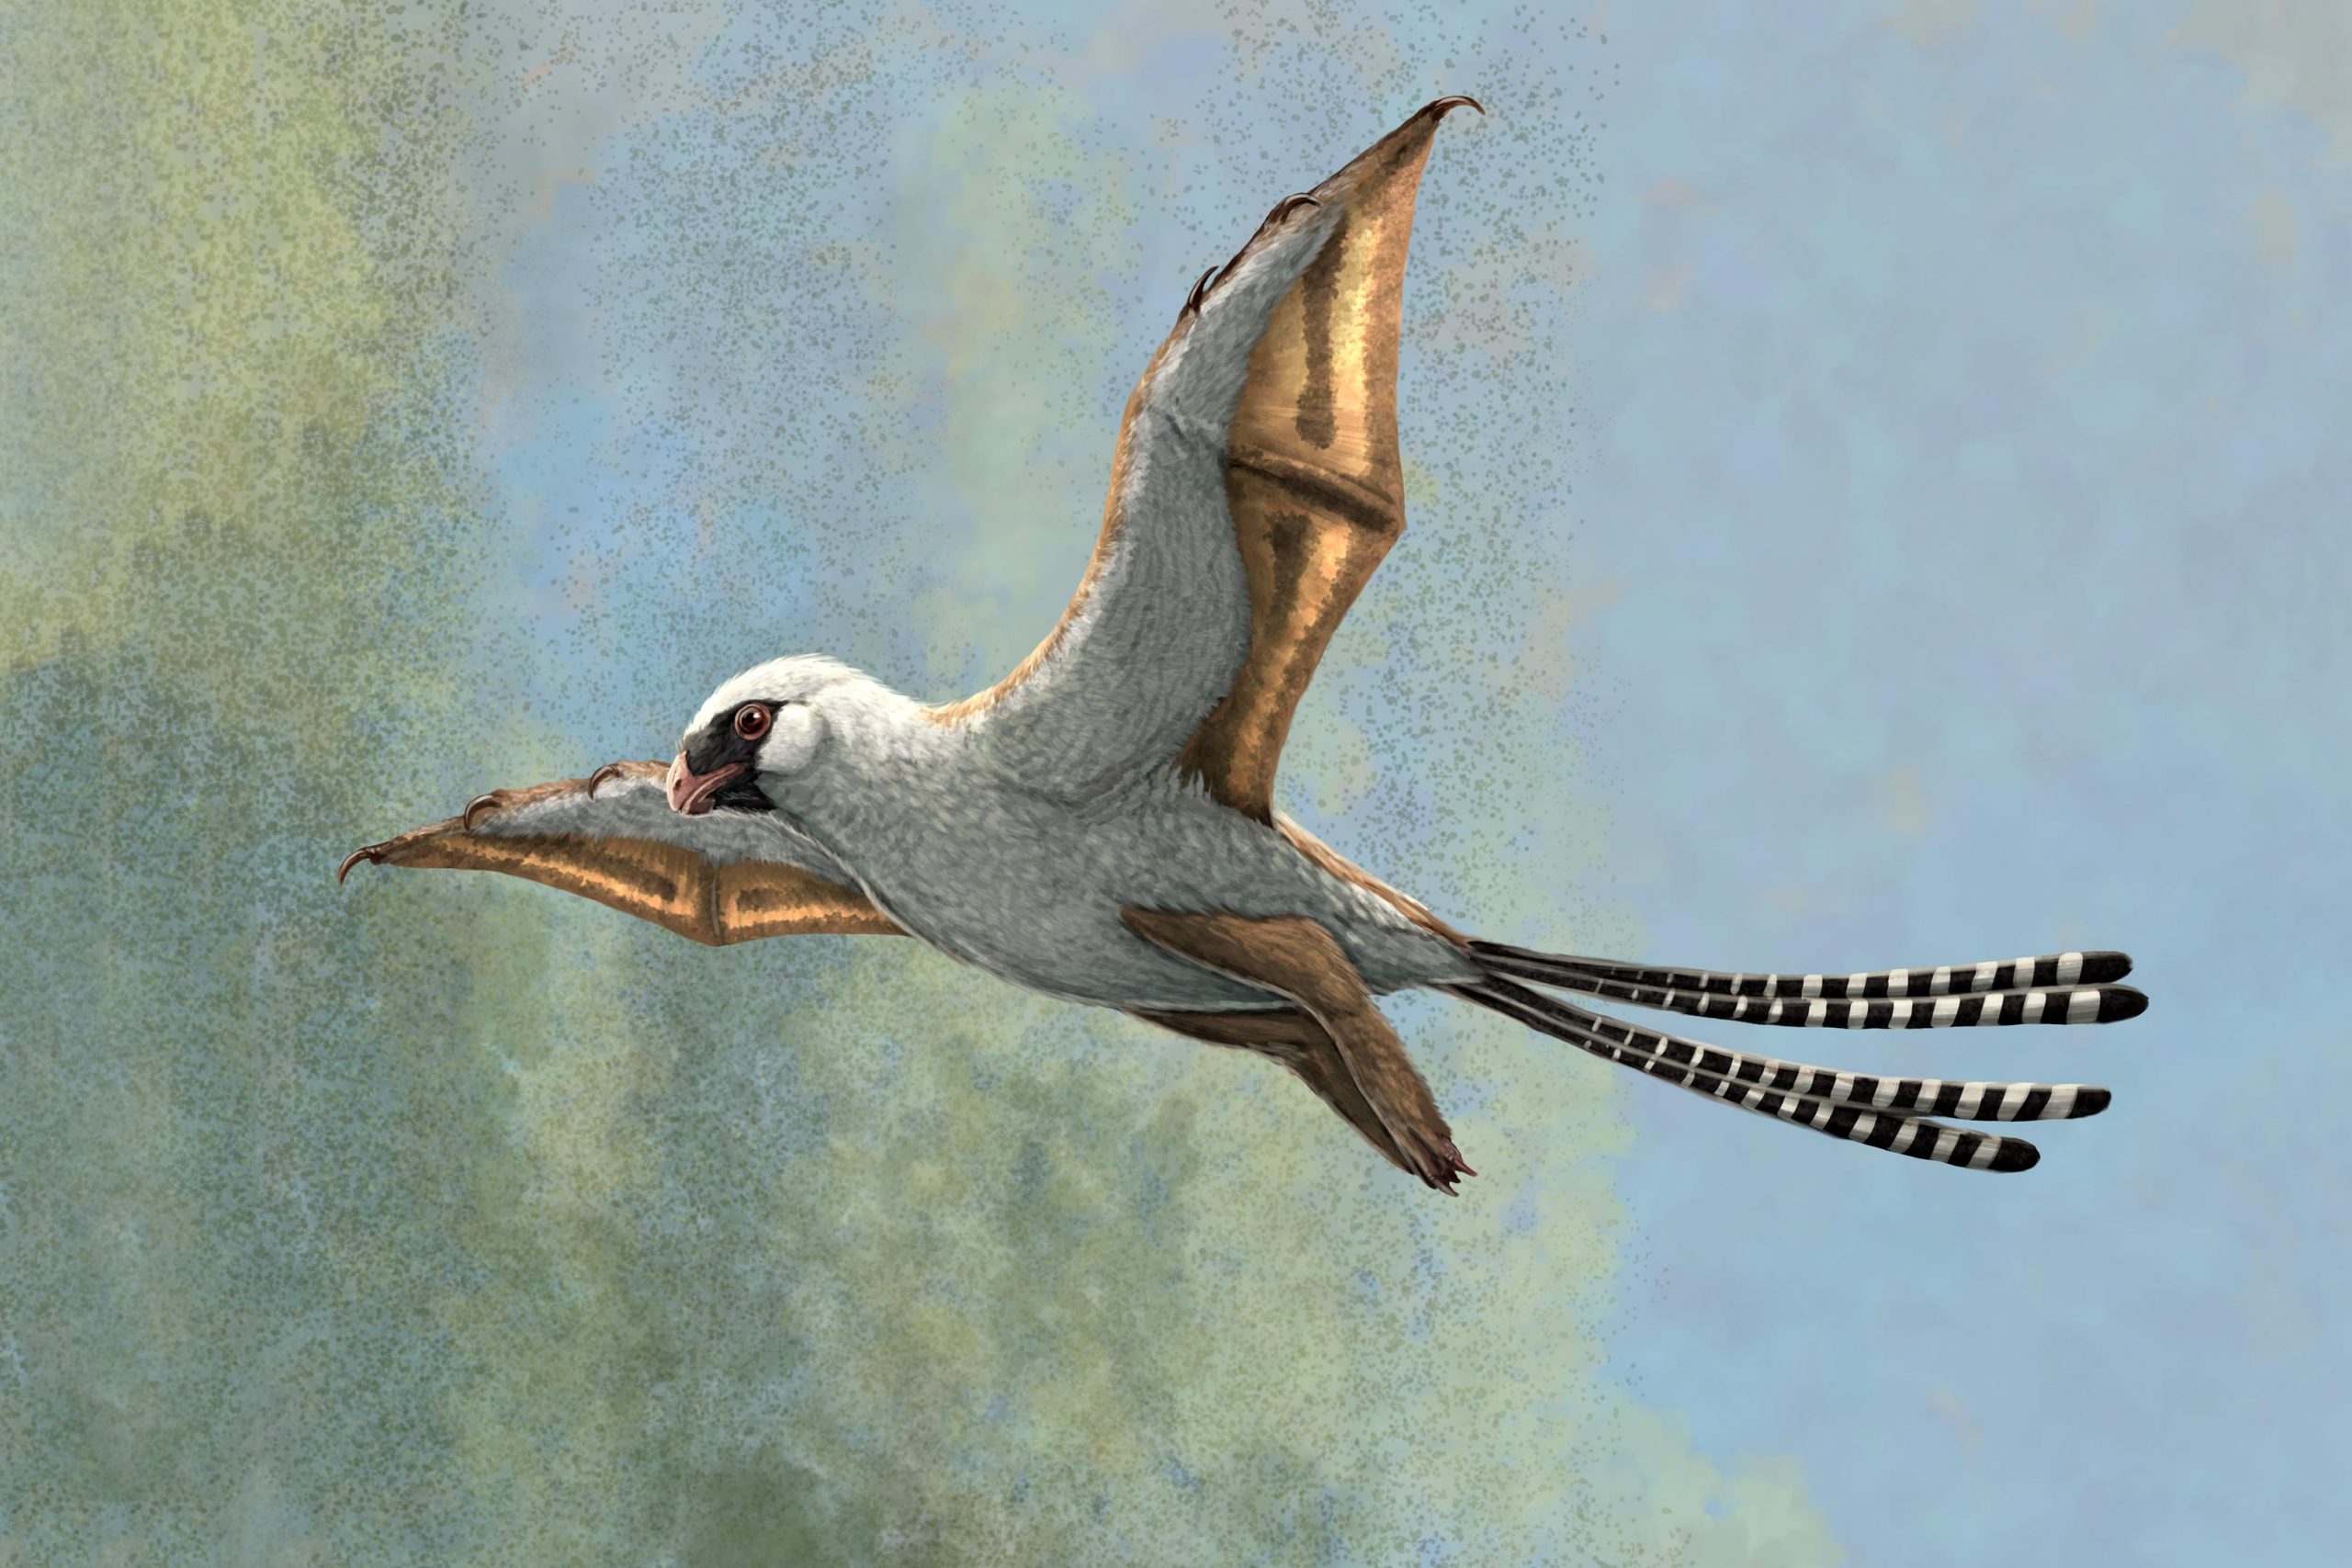 These two bird-sized dinosaurs developed bat-like wings, but they struggled to fly